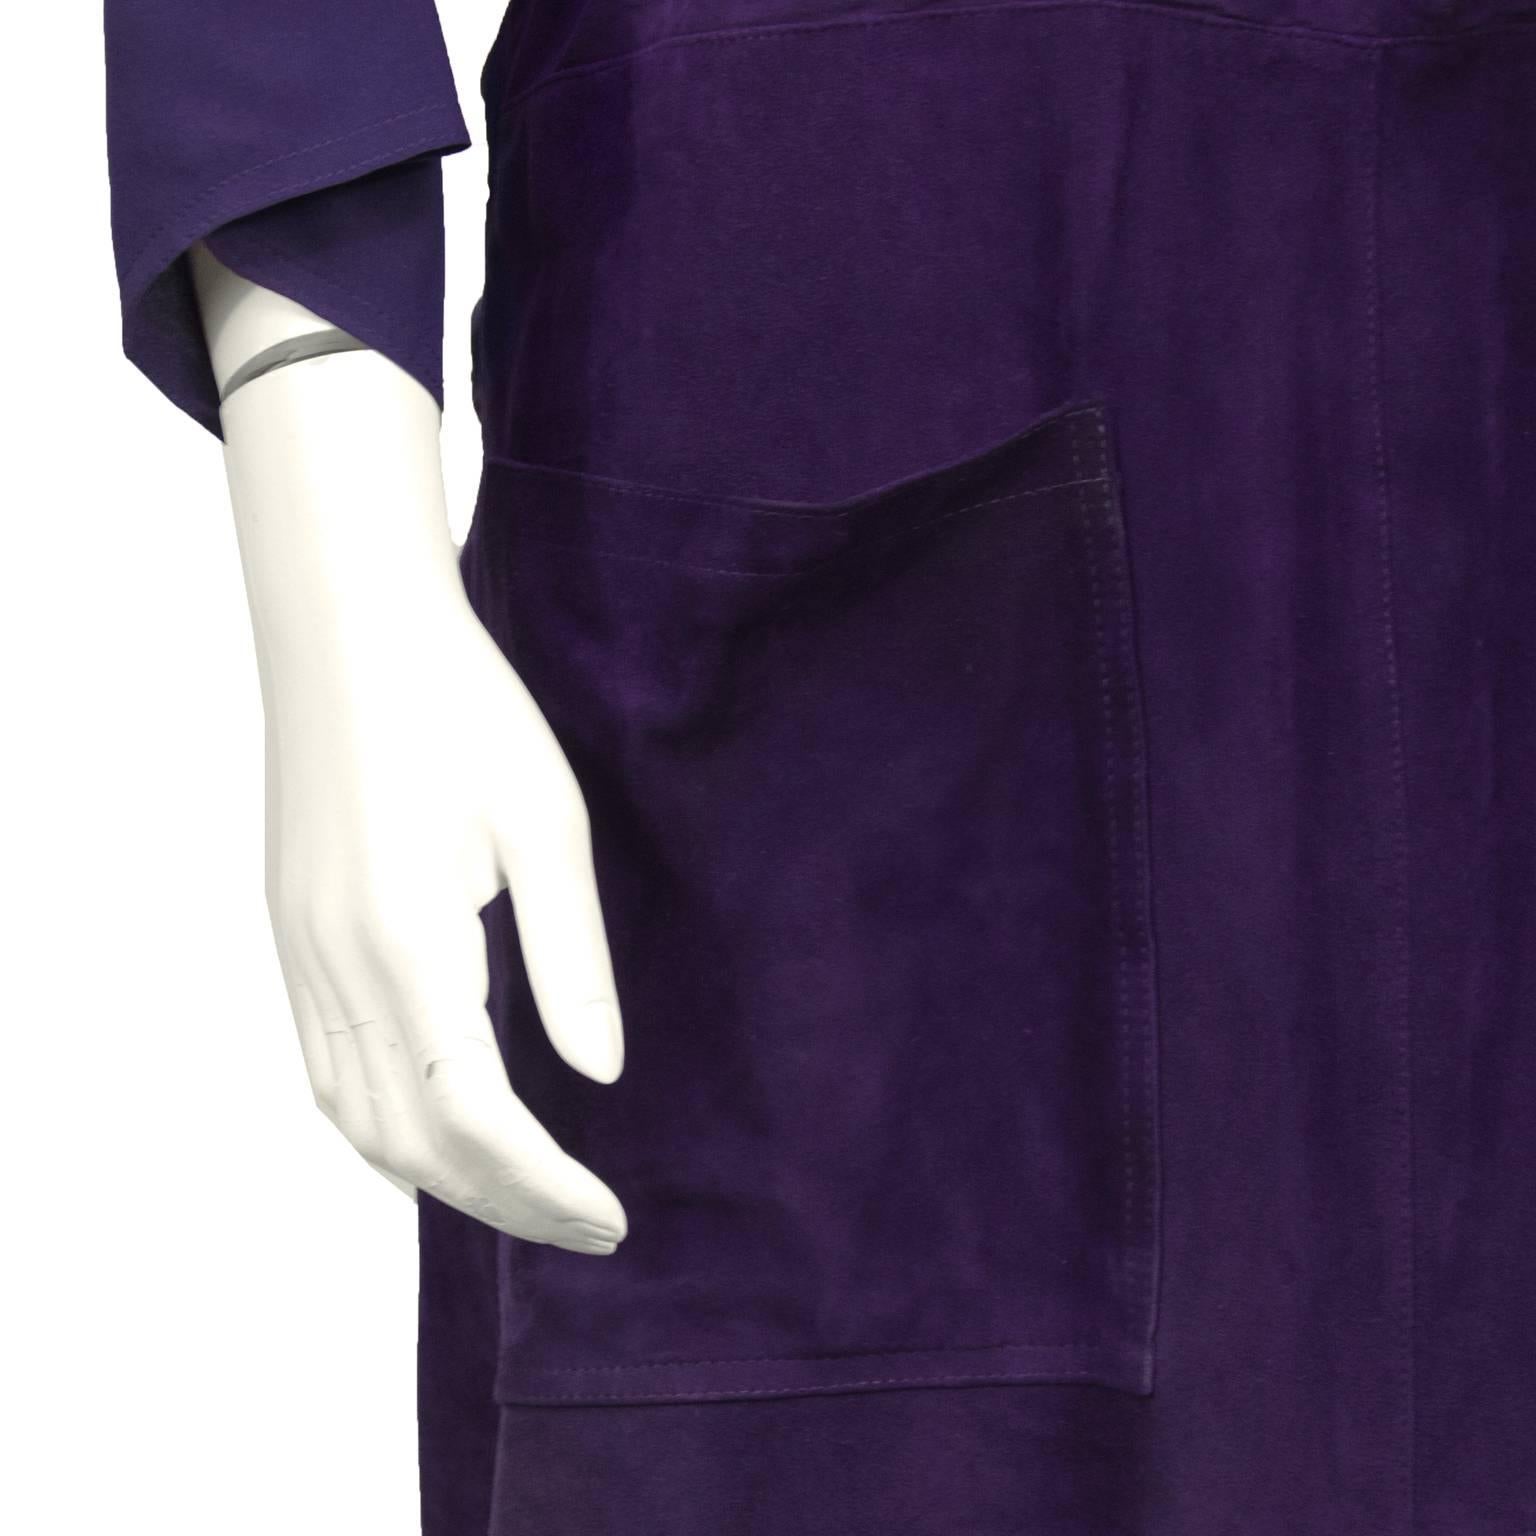 1970's Plum Suede and Rayon Crepe Dress  In Excellent Condition For Sale In Toronto, Ontario